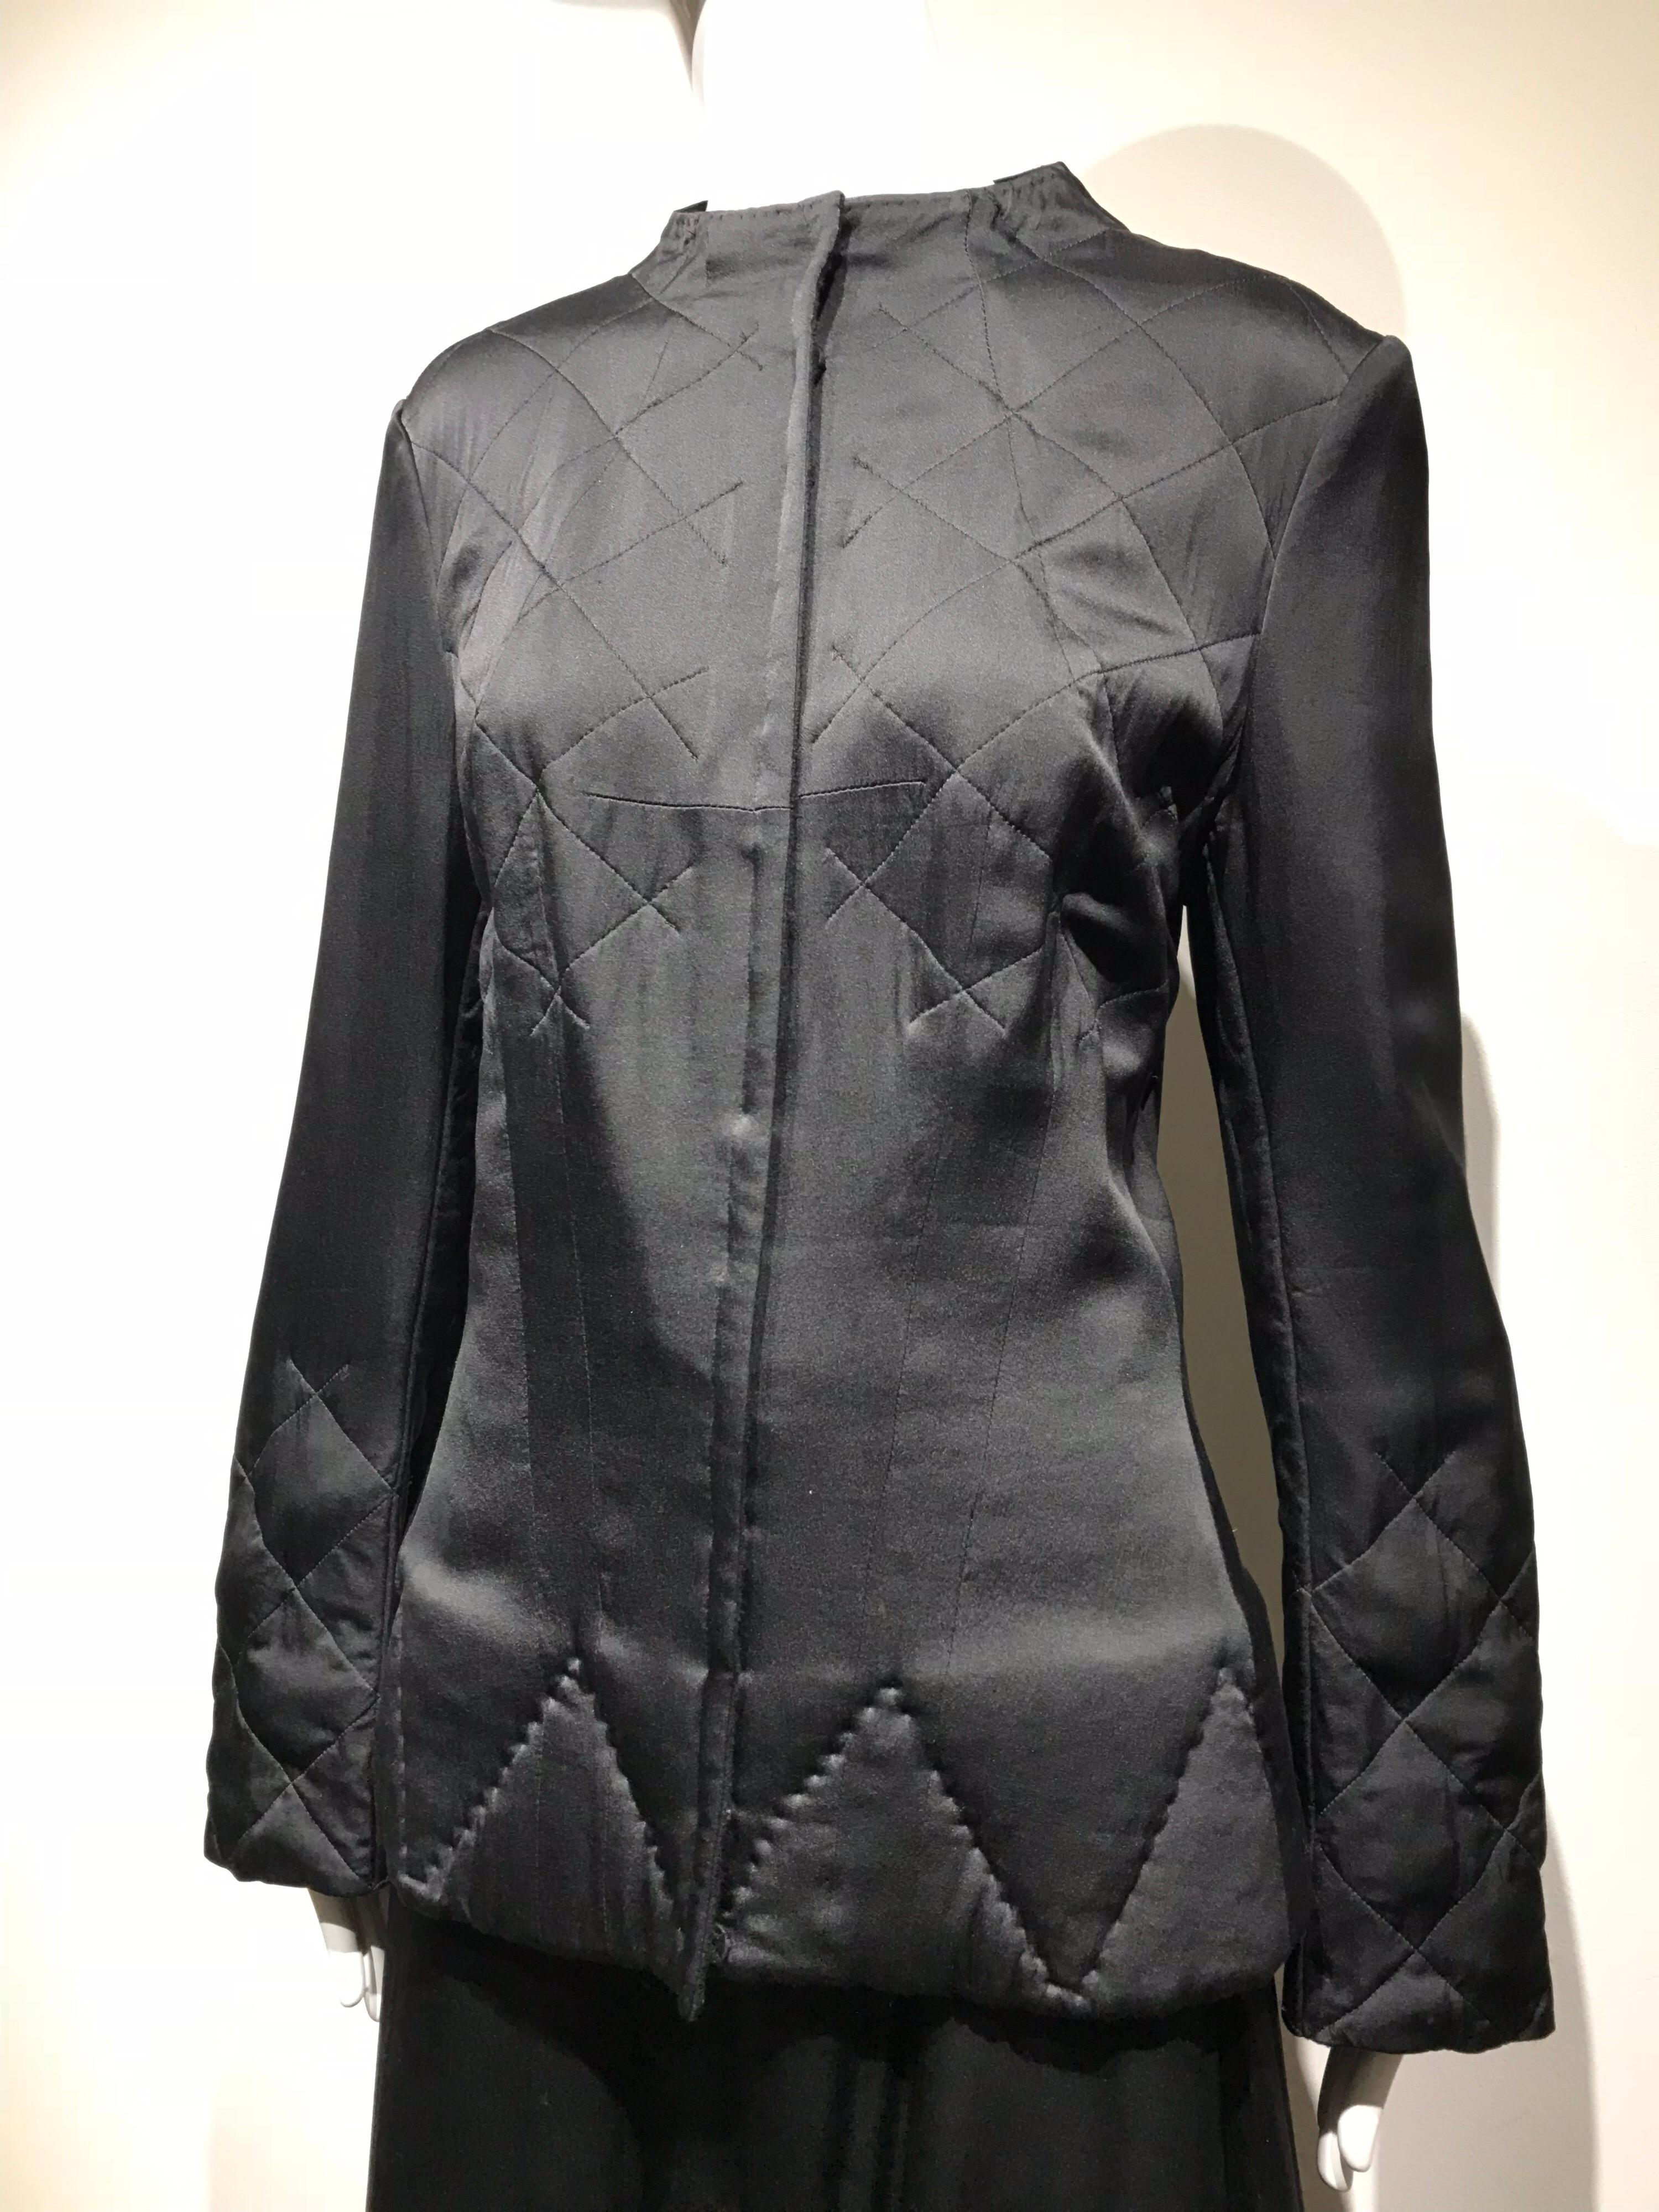 Vintage Yohji Yamamoto Black  Silk quilted jacket with maxi skirt.  Jacket lined in wool. Very Elegant and understated set. Perfect for evening cocktail event for winter. 
Skirt has 2 pockets.  Size: Medium
Measurement:
Jacket bust: 38 inches/